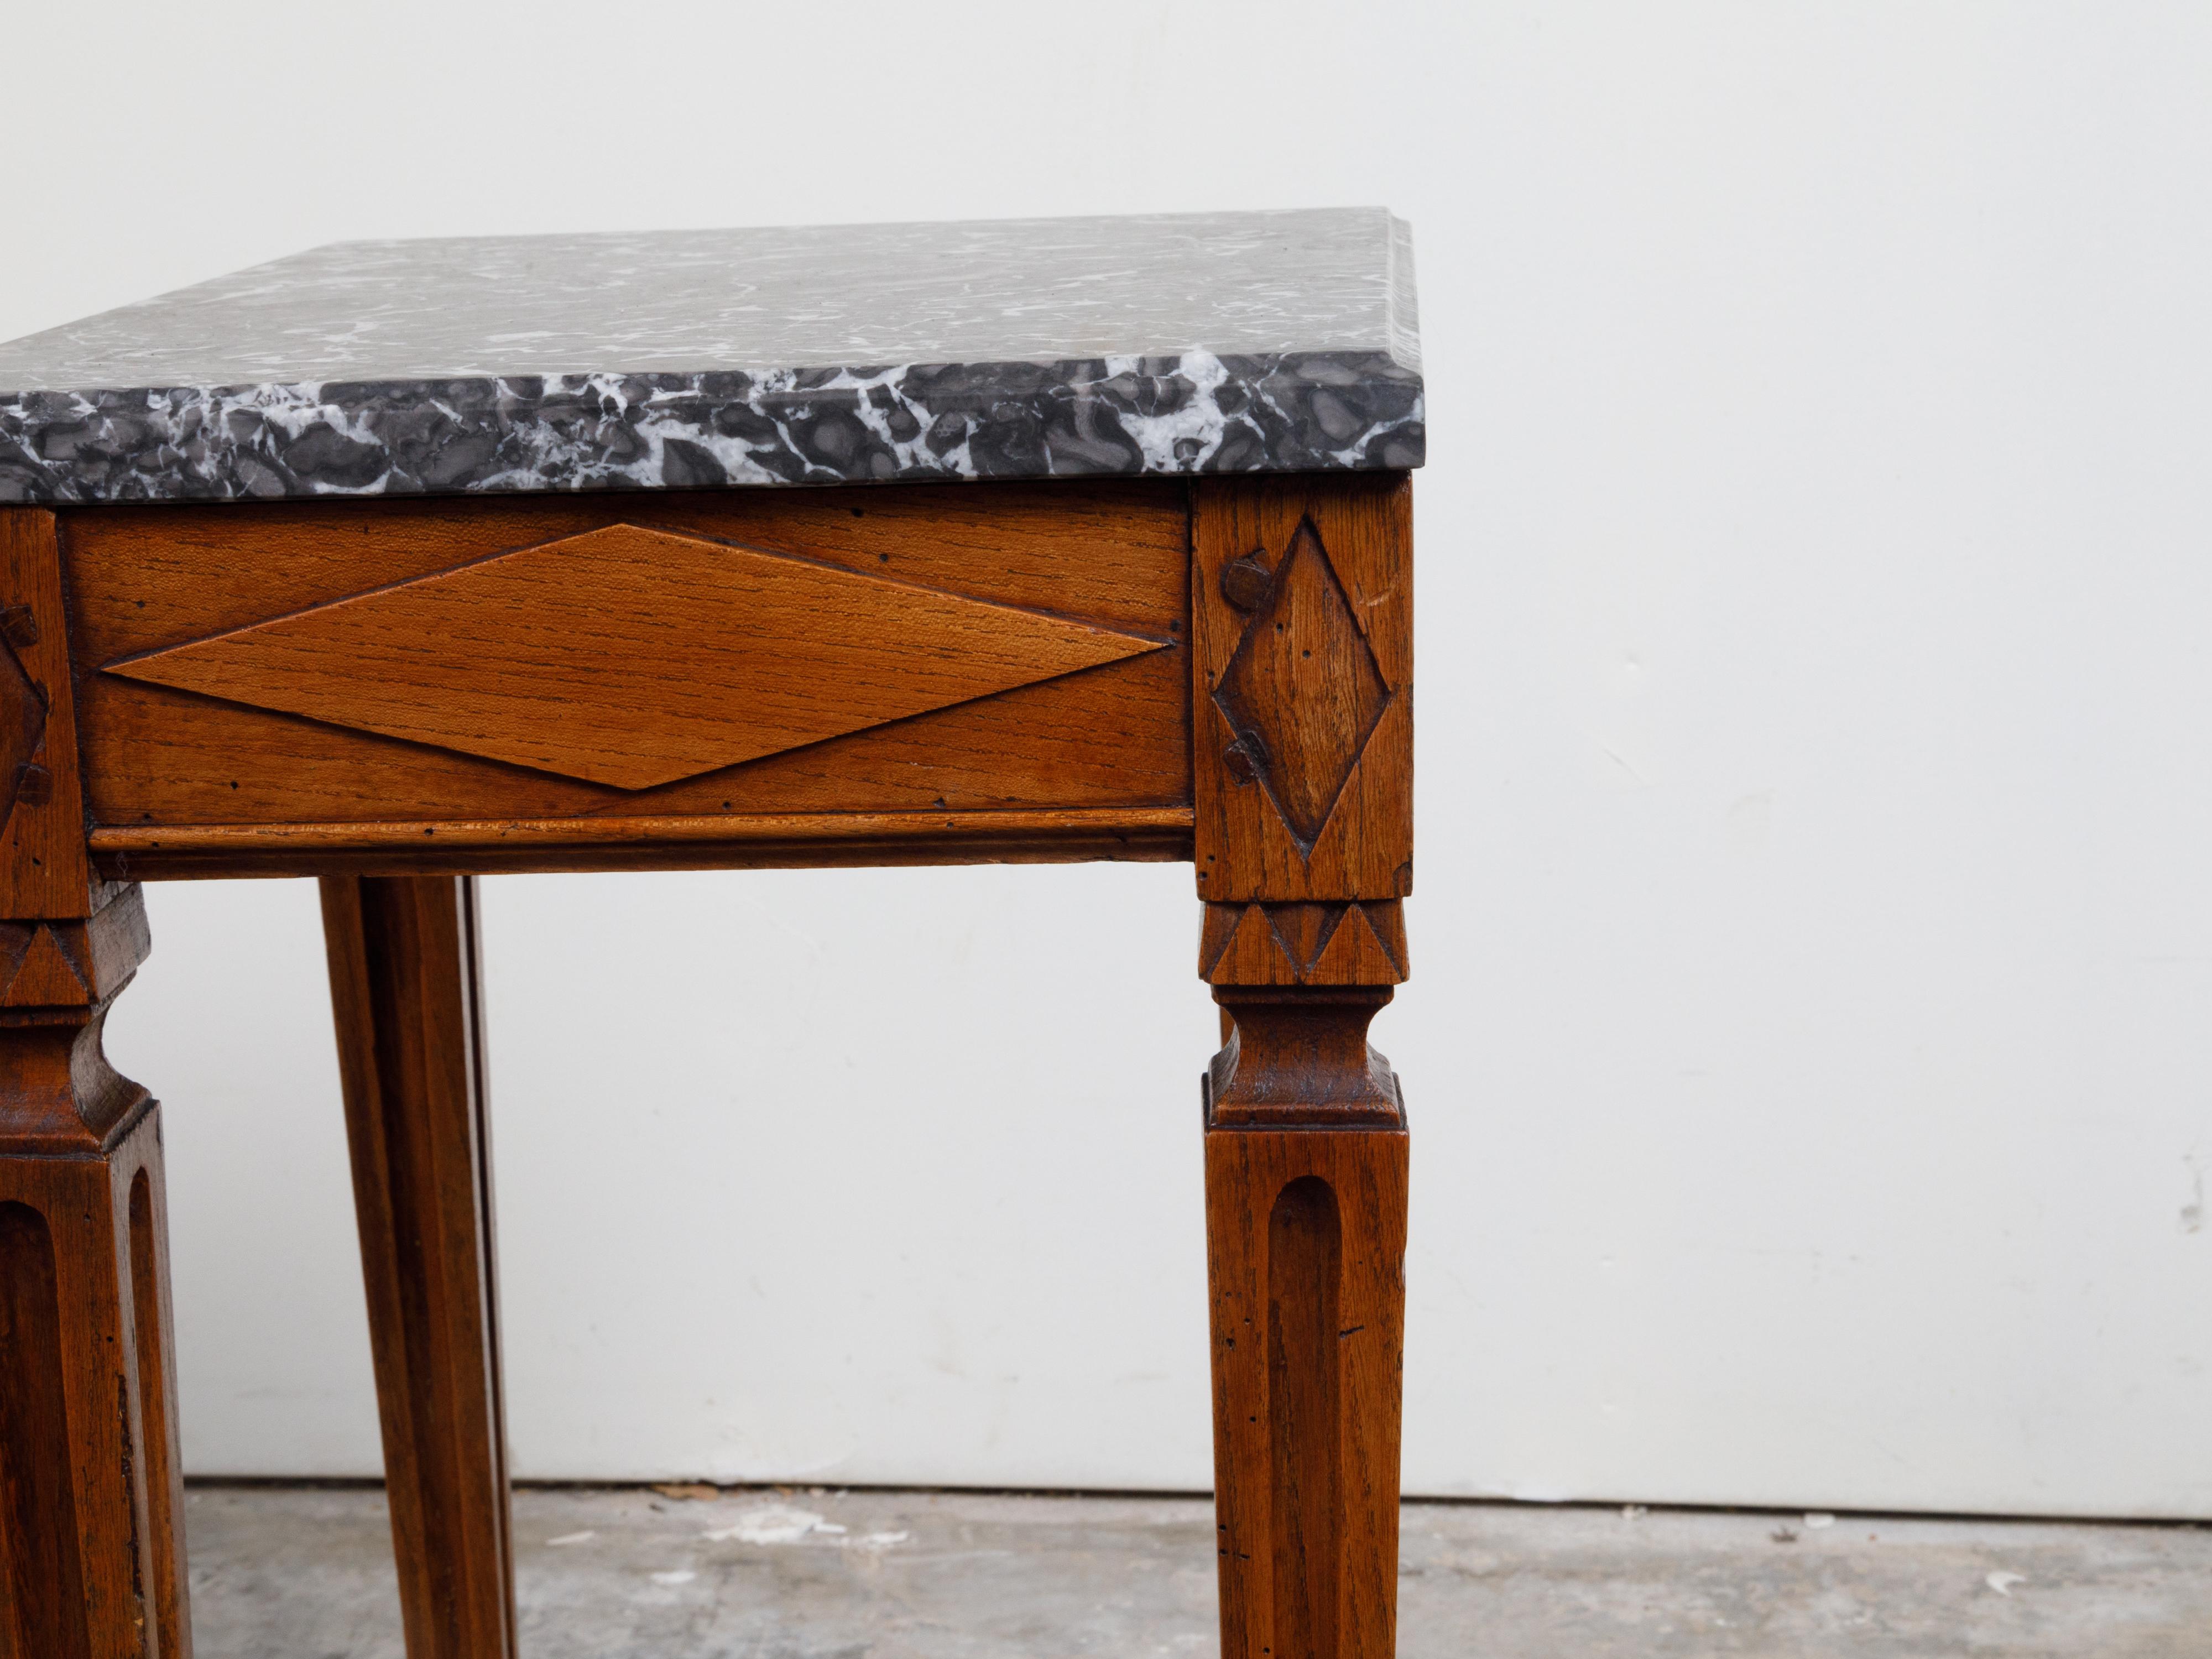 French Neoclassical Style 19th Century Wooden Table with Grey Veined Marble Top For Sale 4